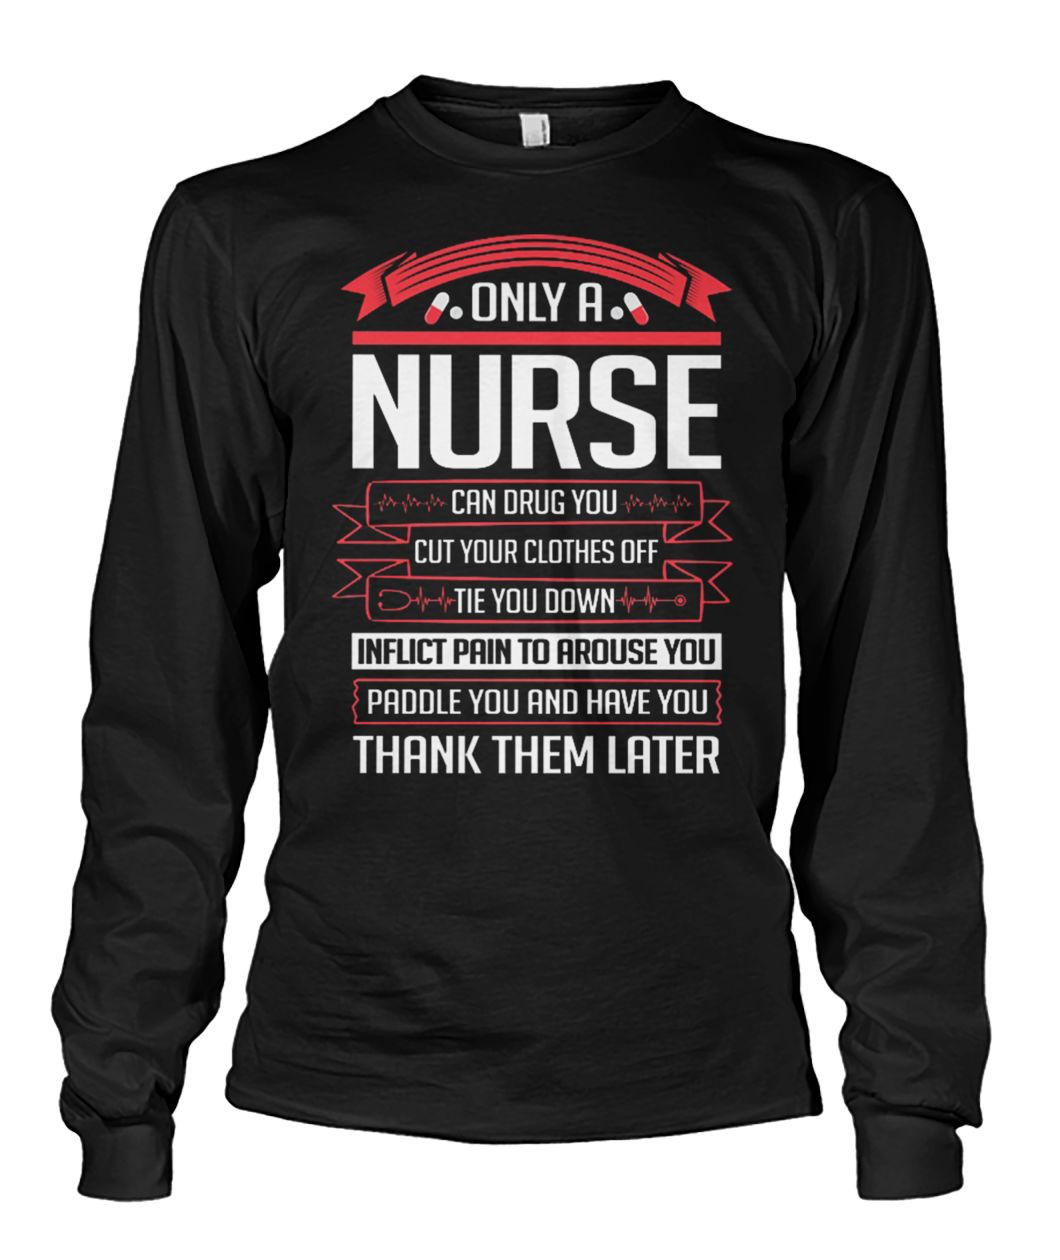 Only a nurse can drug you cut your clothes off tie you down unisex long sleeve